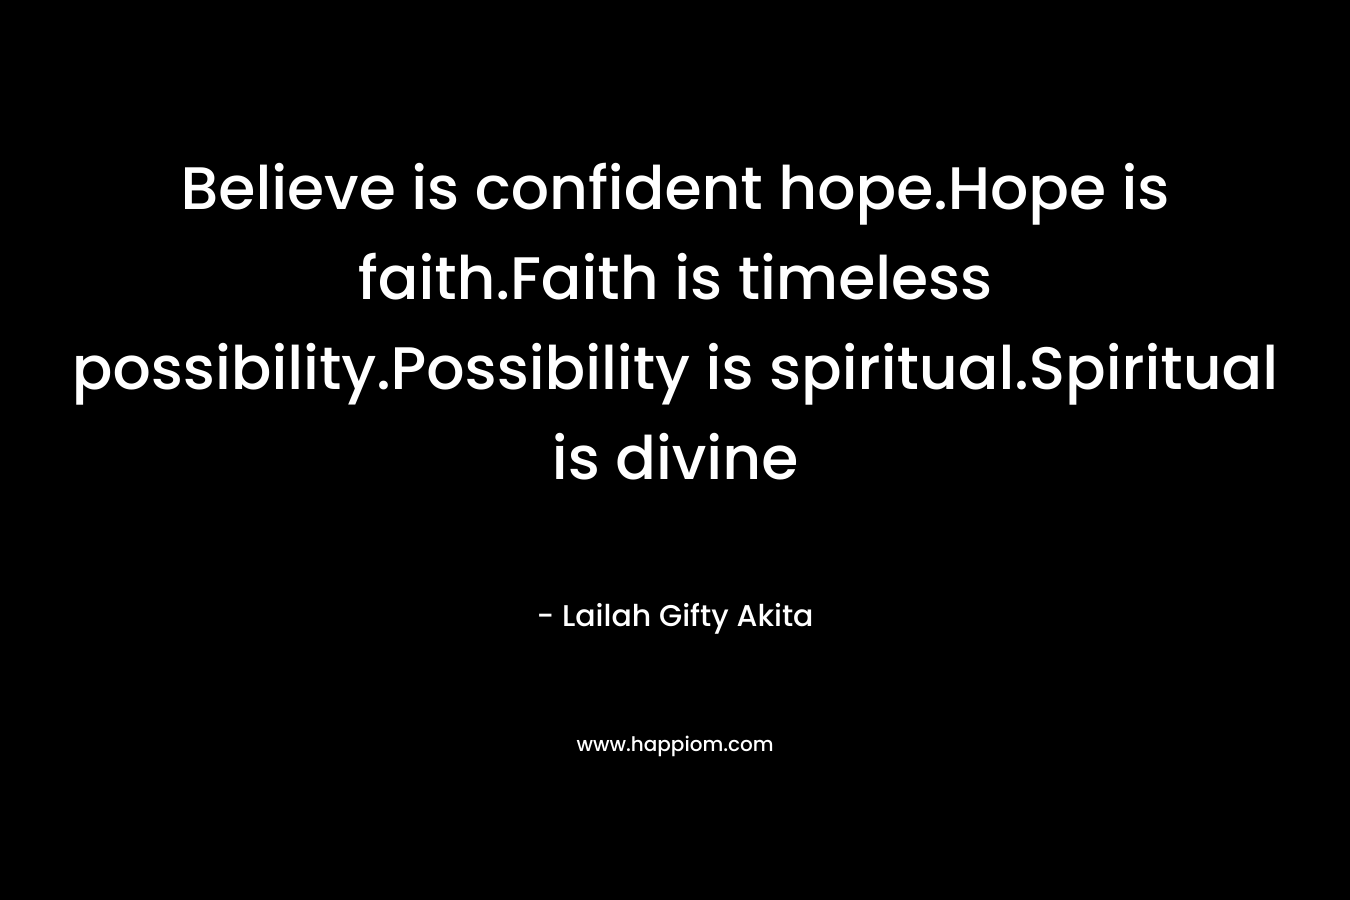 Believe is confident hope.Hope is faith.Faith is timeless possibility.Possibility is spiritual.Spiritual is divine